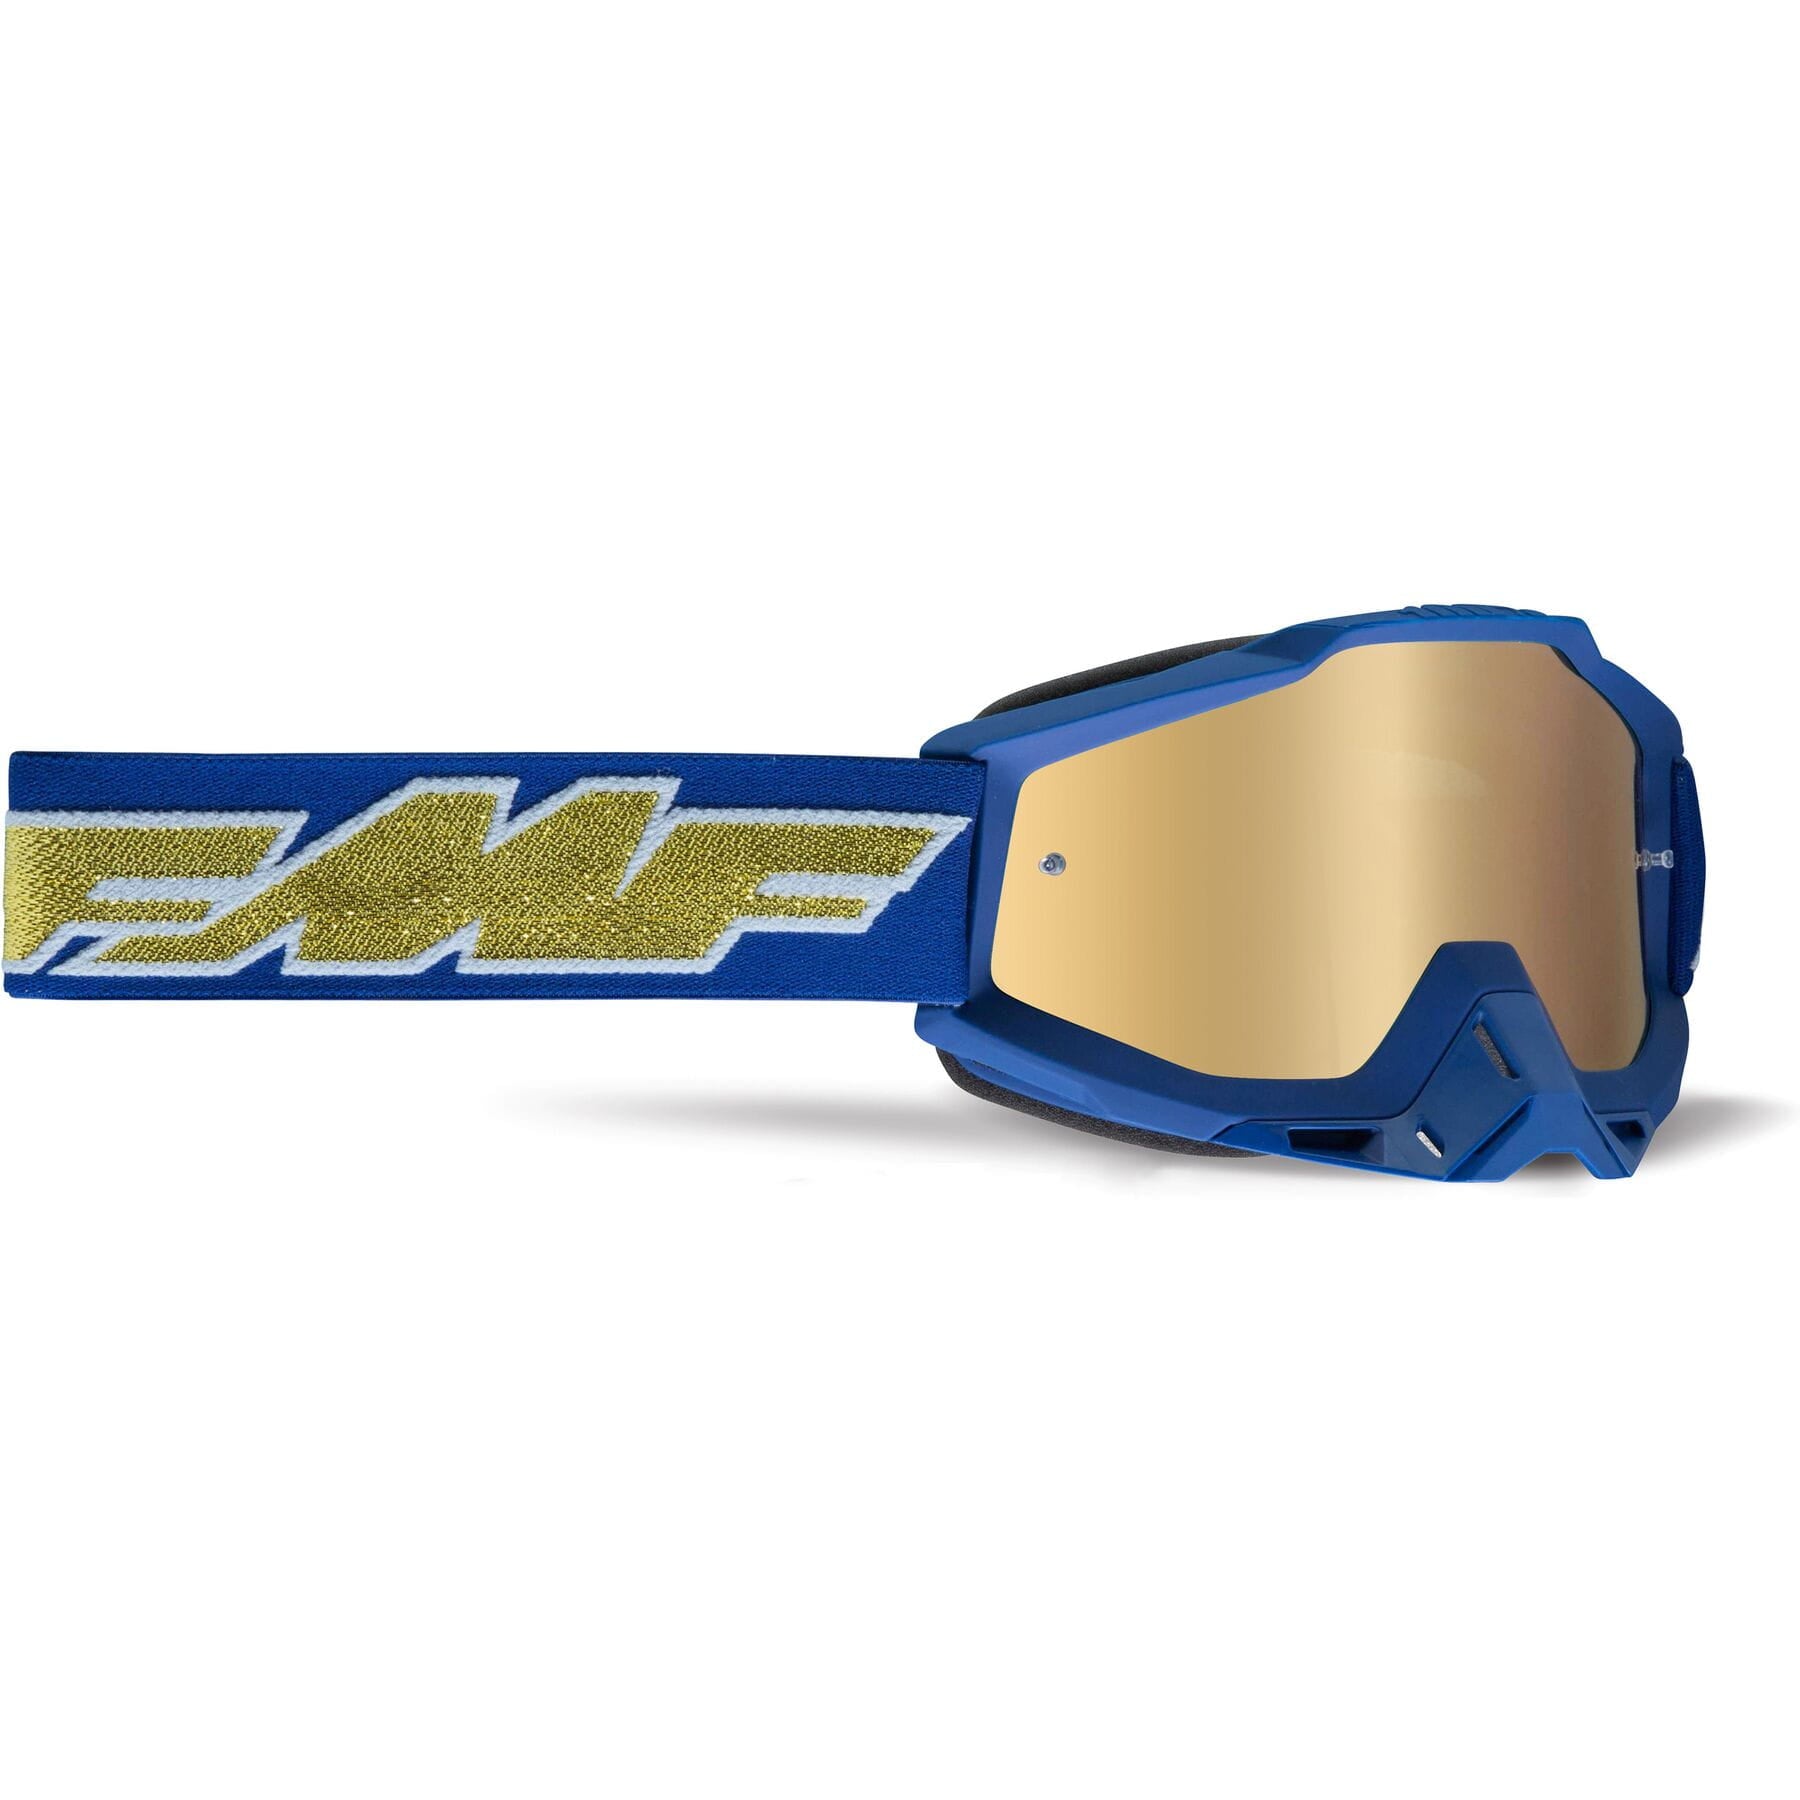 POWERBOMB Goggle Rocket Navy with Gold Mirror and True Gold Lens